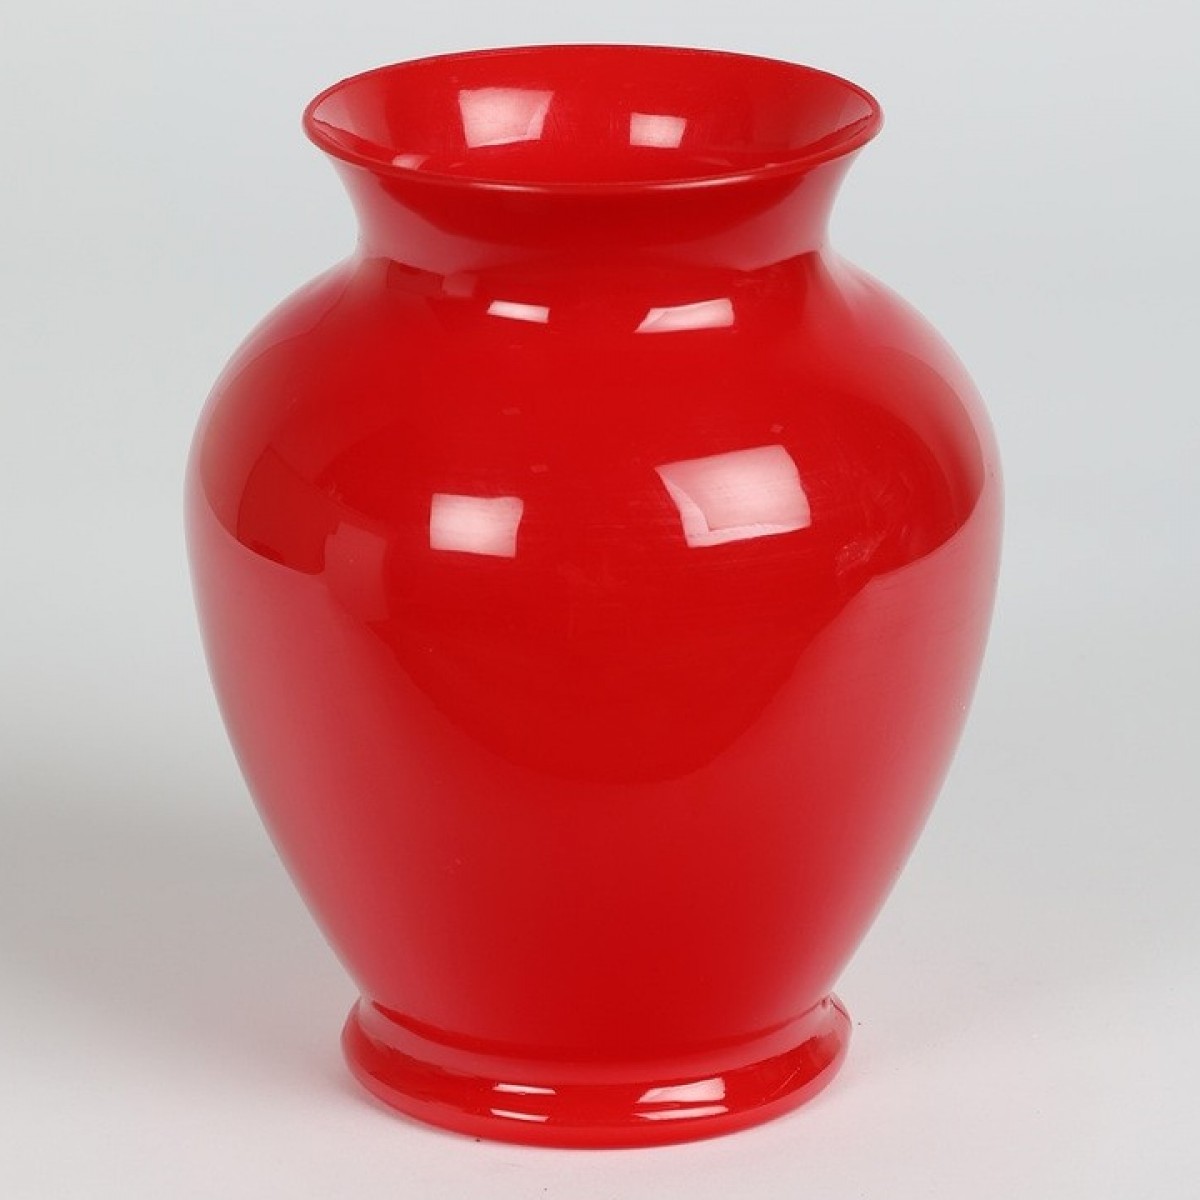 5105 Ginger Red 9x16cm Acrylic Vase - 1 No